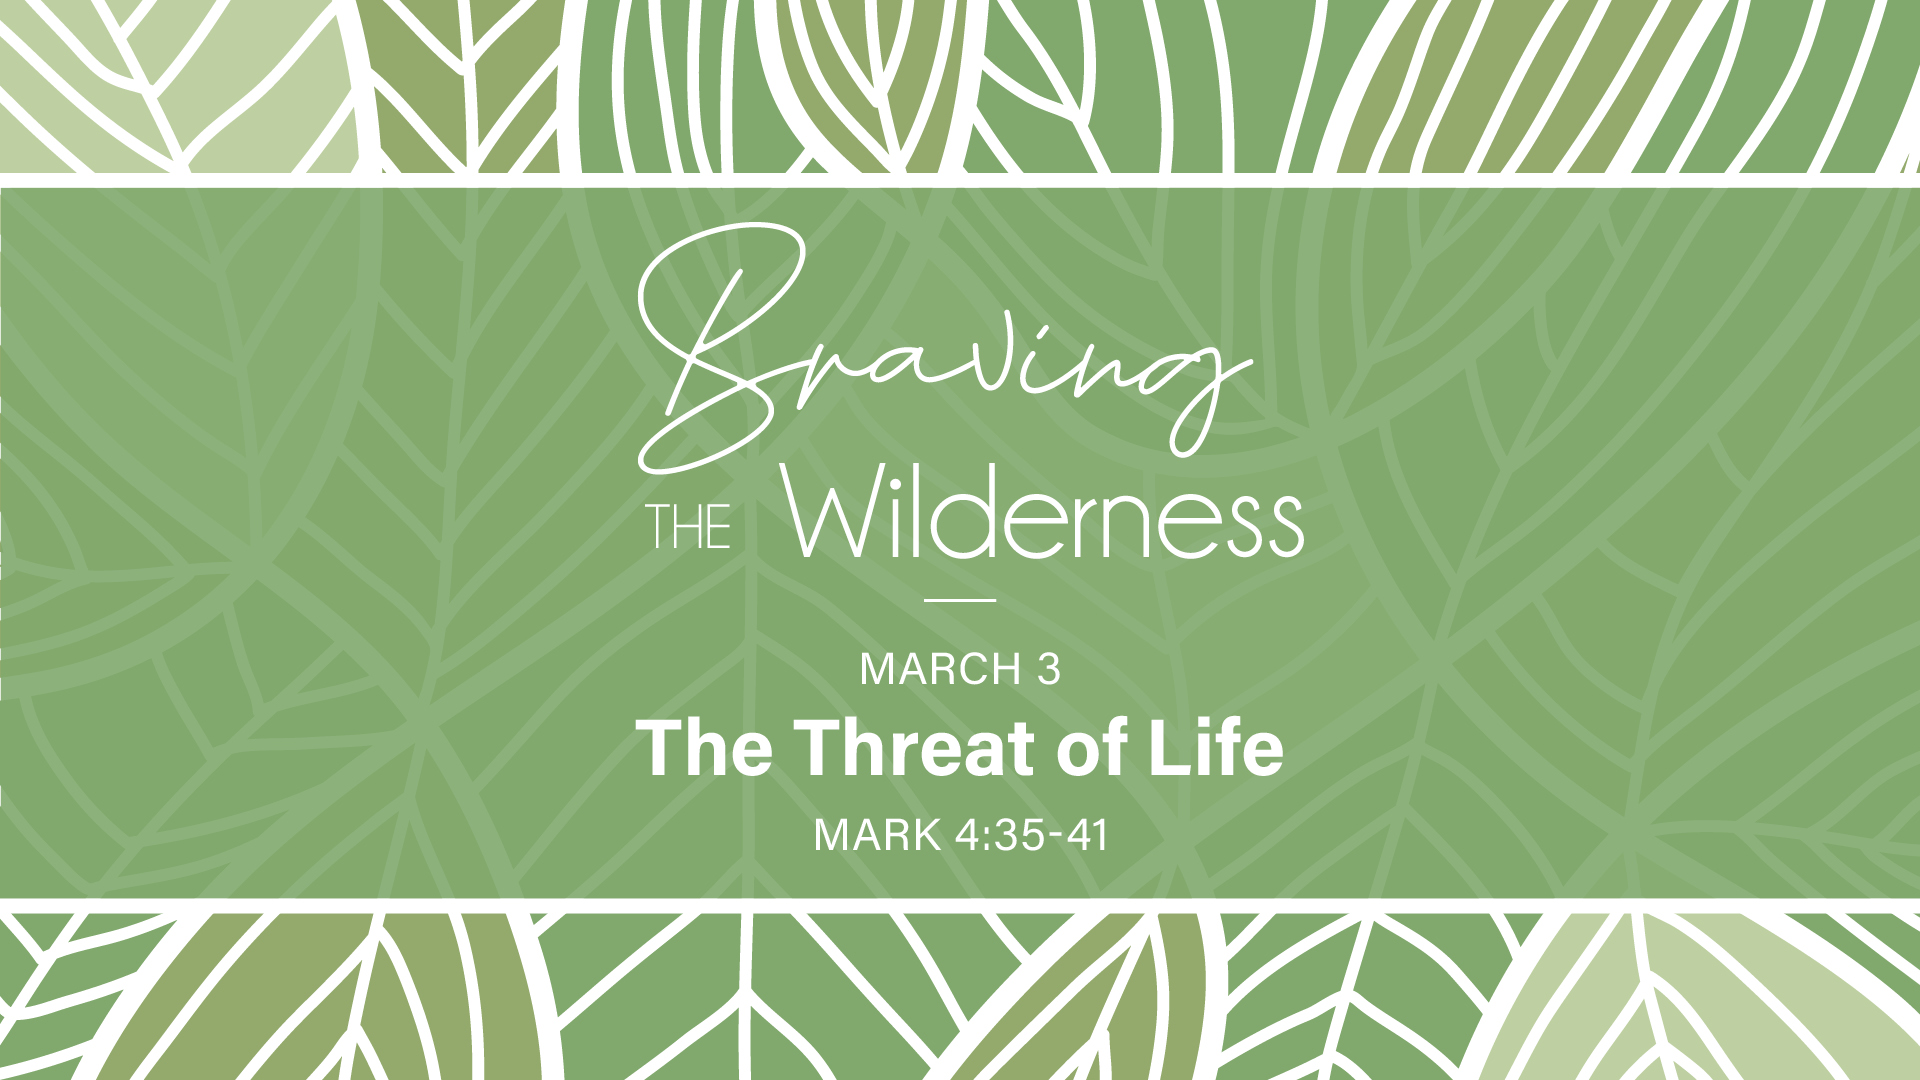 Braving the Wilderness: The Threat of Life